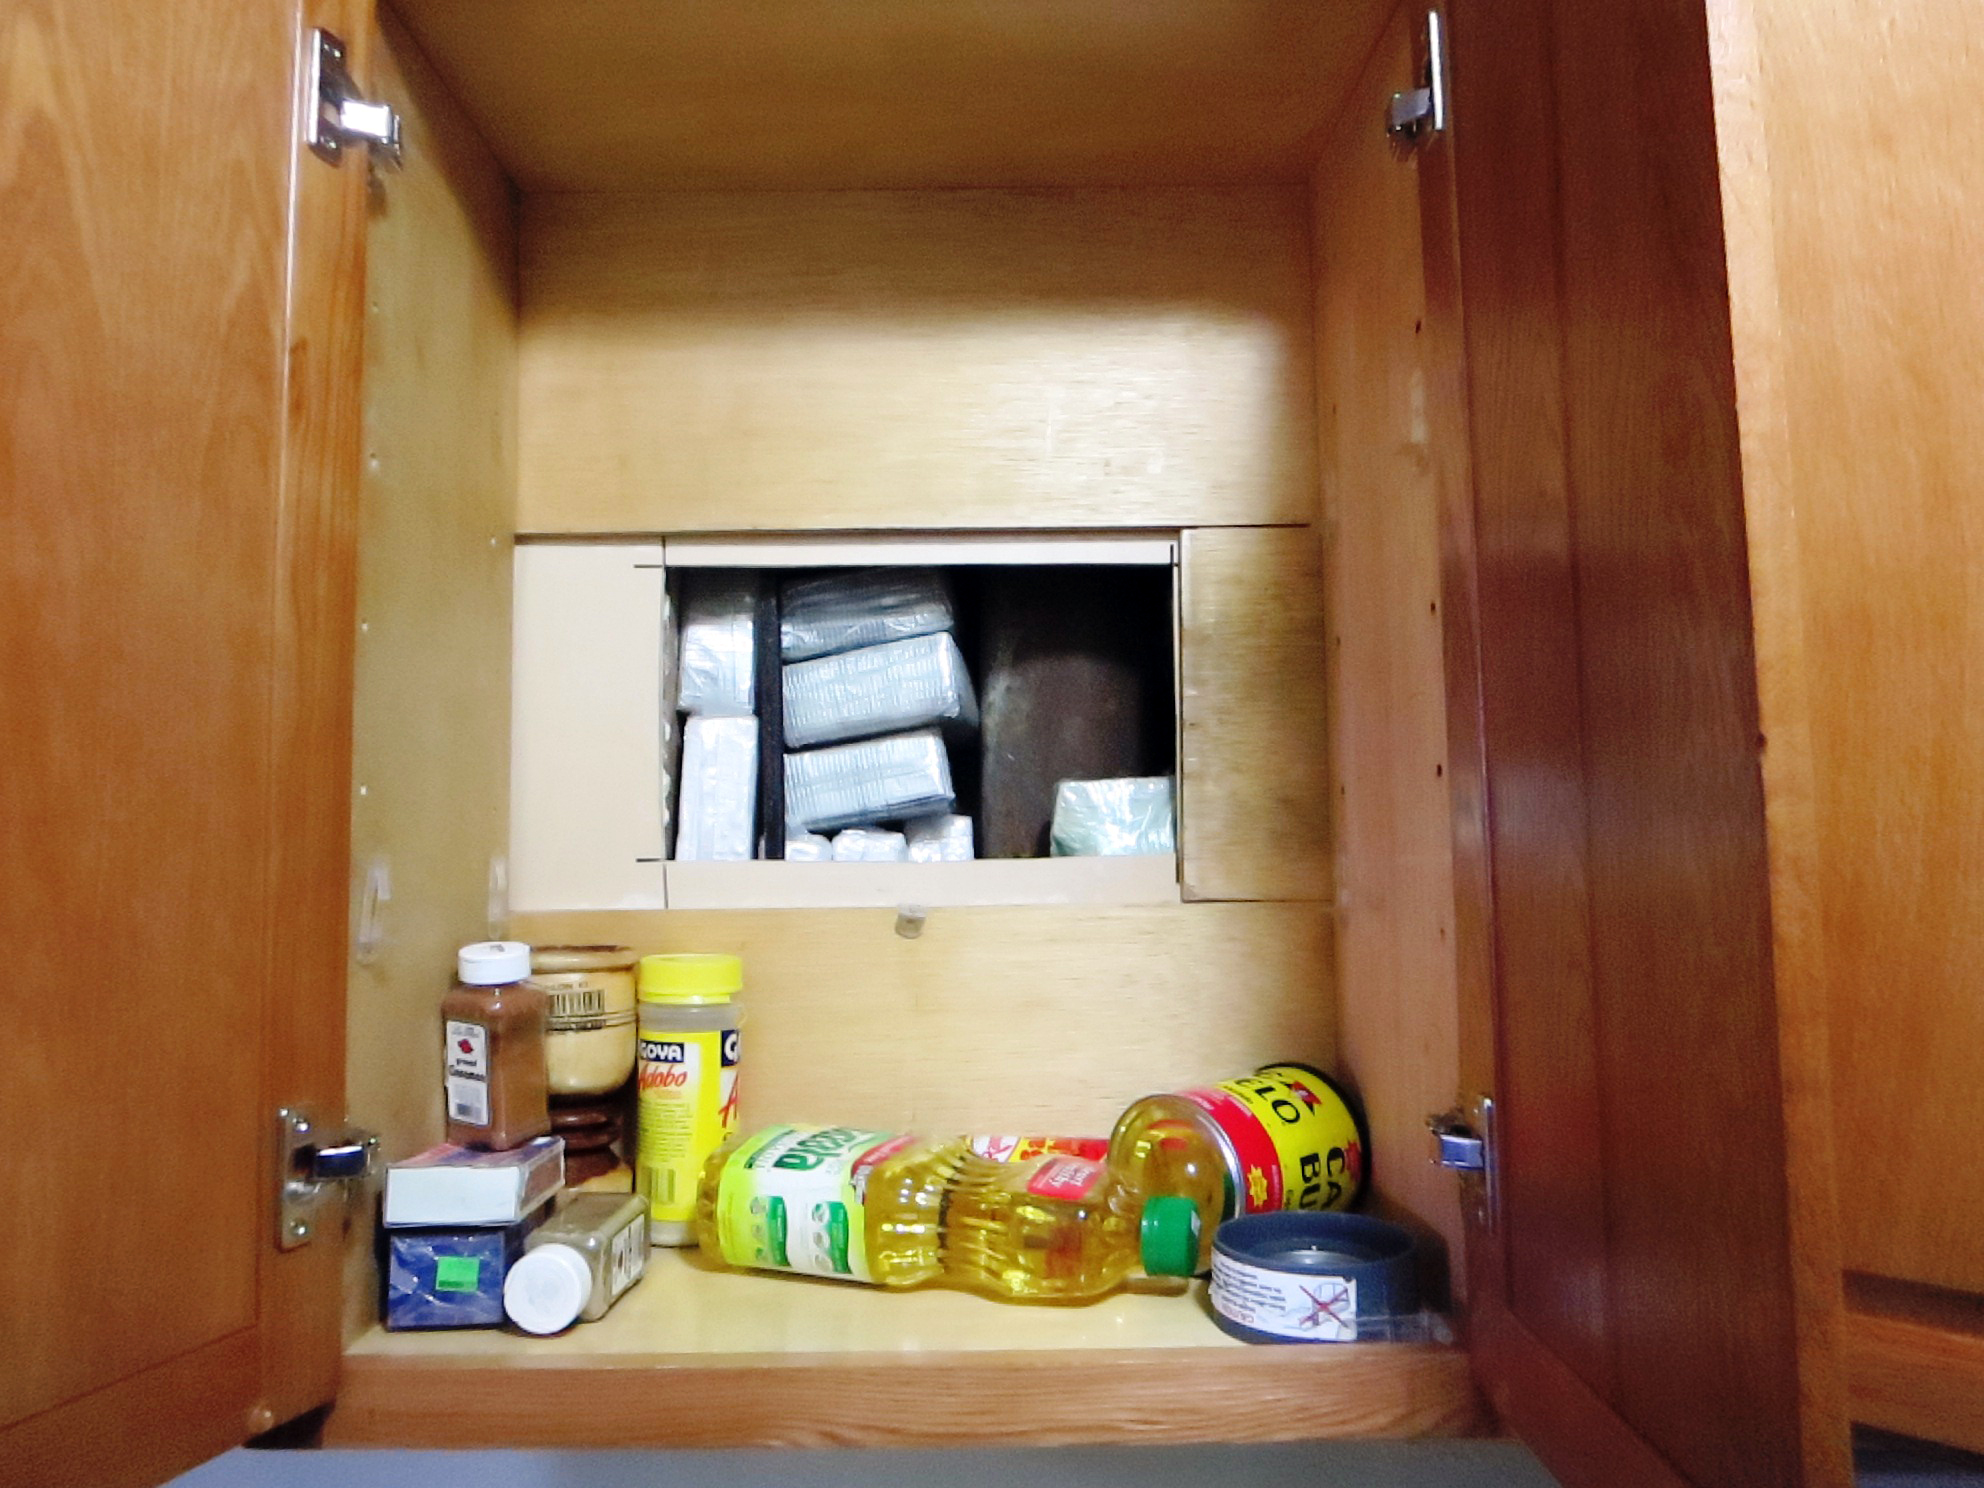 Hidden trap found in kitchen cabinet of Washington Heights apartment used for alleged drug trafficking operation. (credit: Officer of the Special Narcotics Prosecutor)